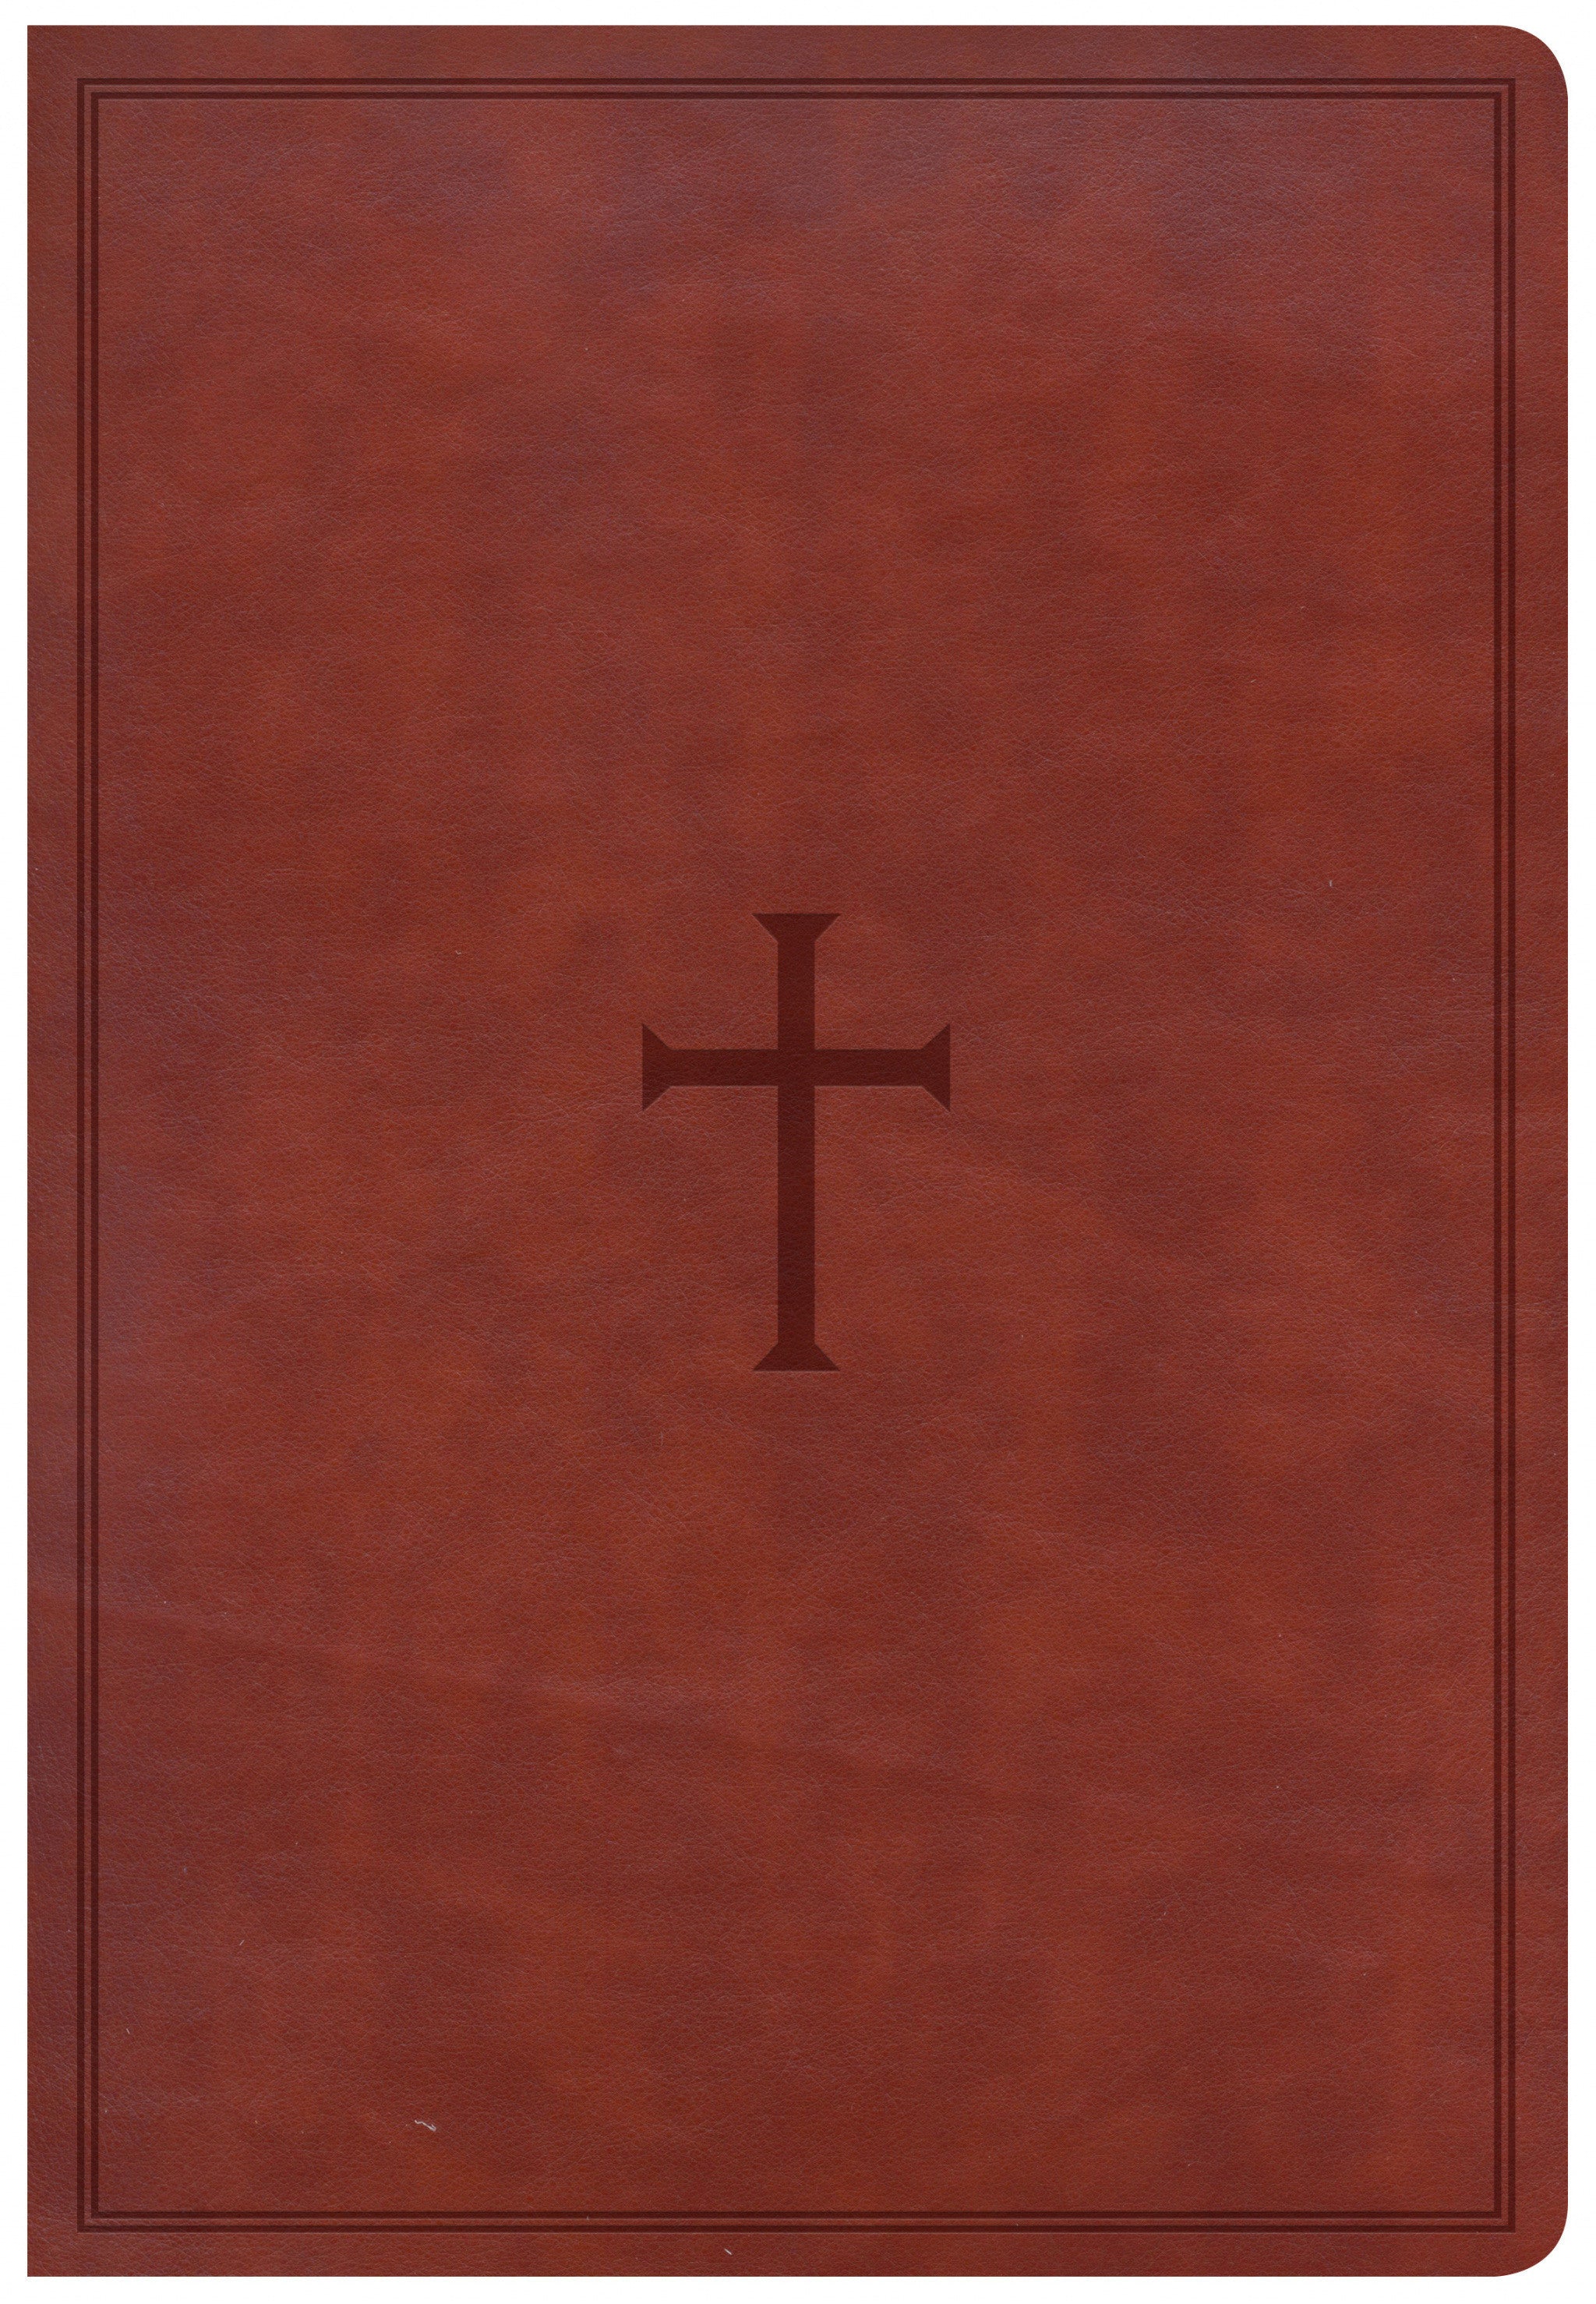 Image of CSB Super Giant Print Reference Bible, Brown Leathertouch other